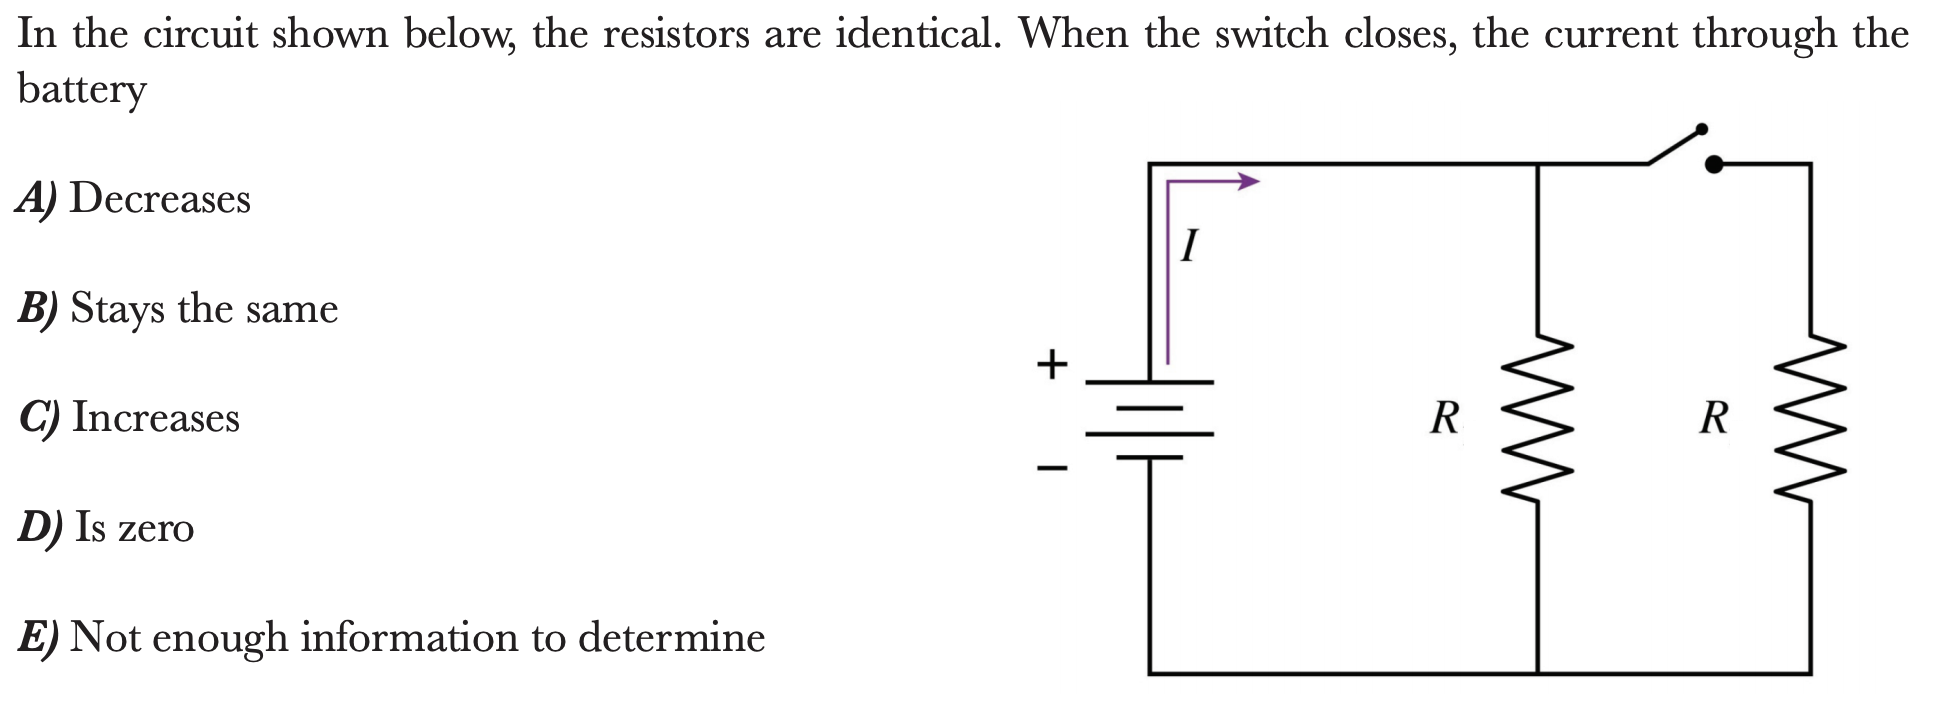 In the circuit shown below, the resistors are identical. When the switch closes, the current through the
battery
A) Decreases
B) Stays the same
C) Increases
R
R
D) Is zero
E) Not enough information to determine
